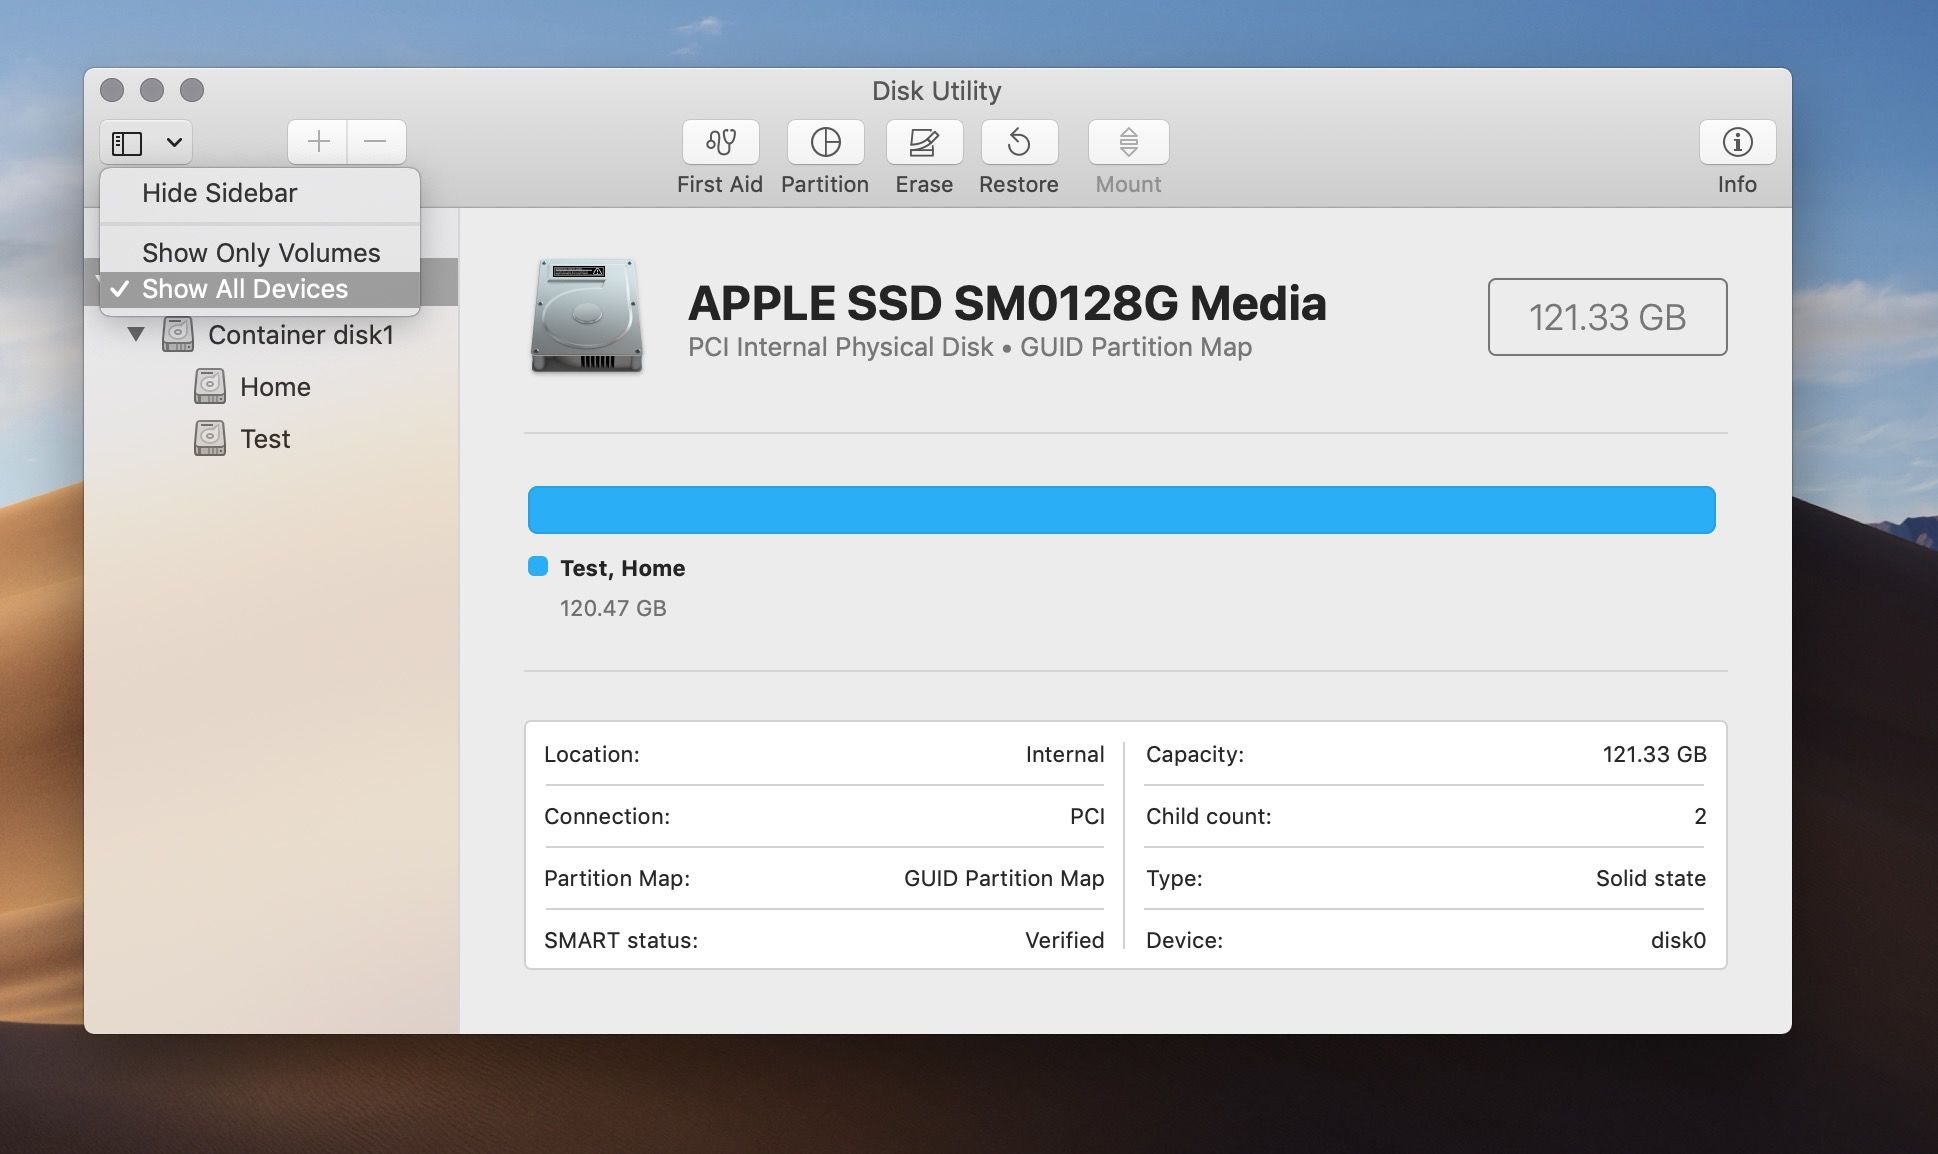 The partition bar will not let me drag it past 40gb for mac and windows 7